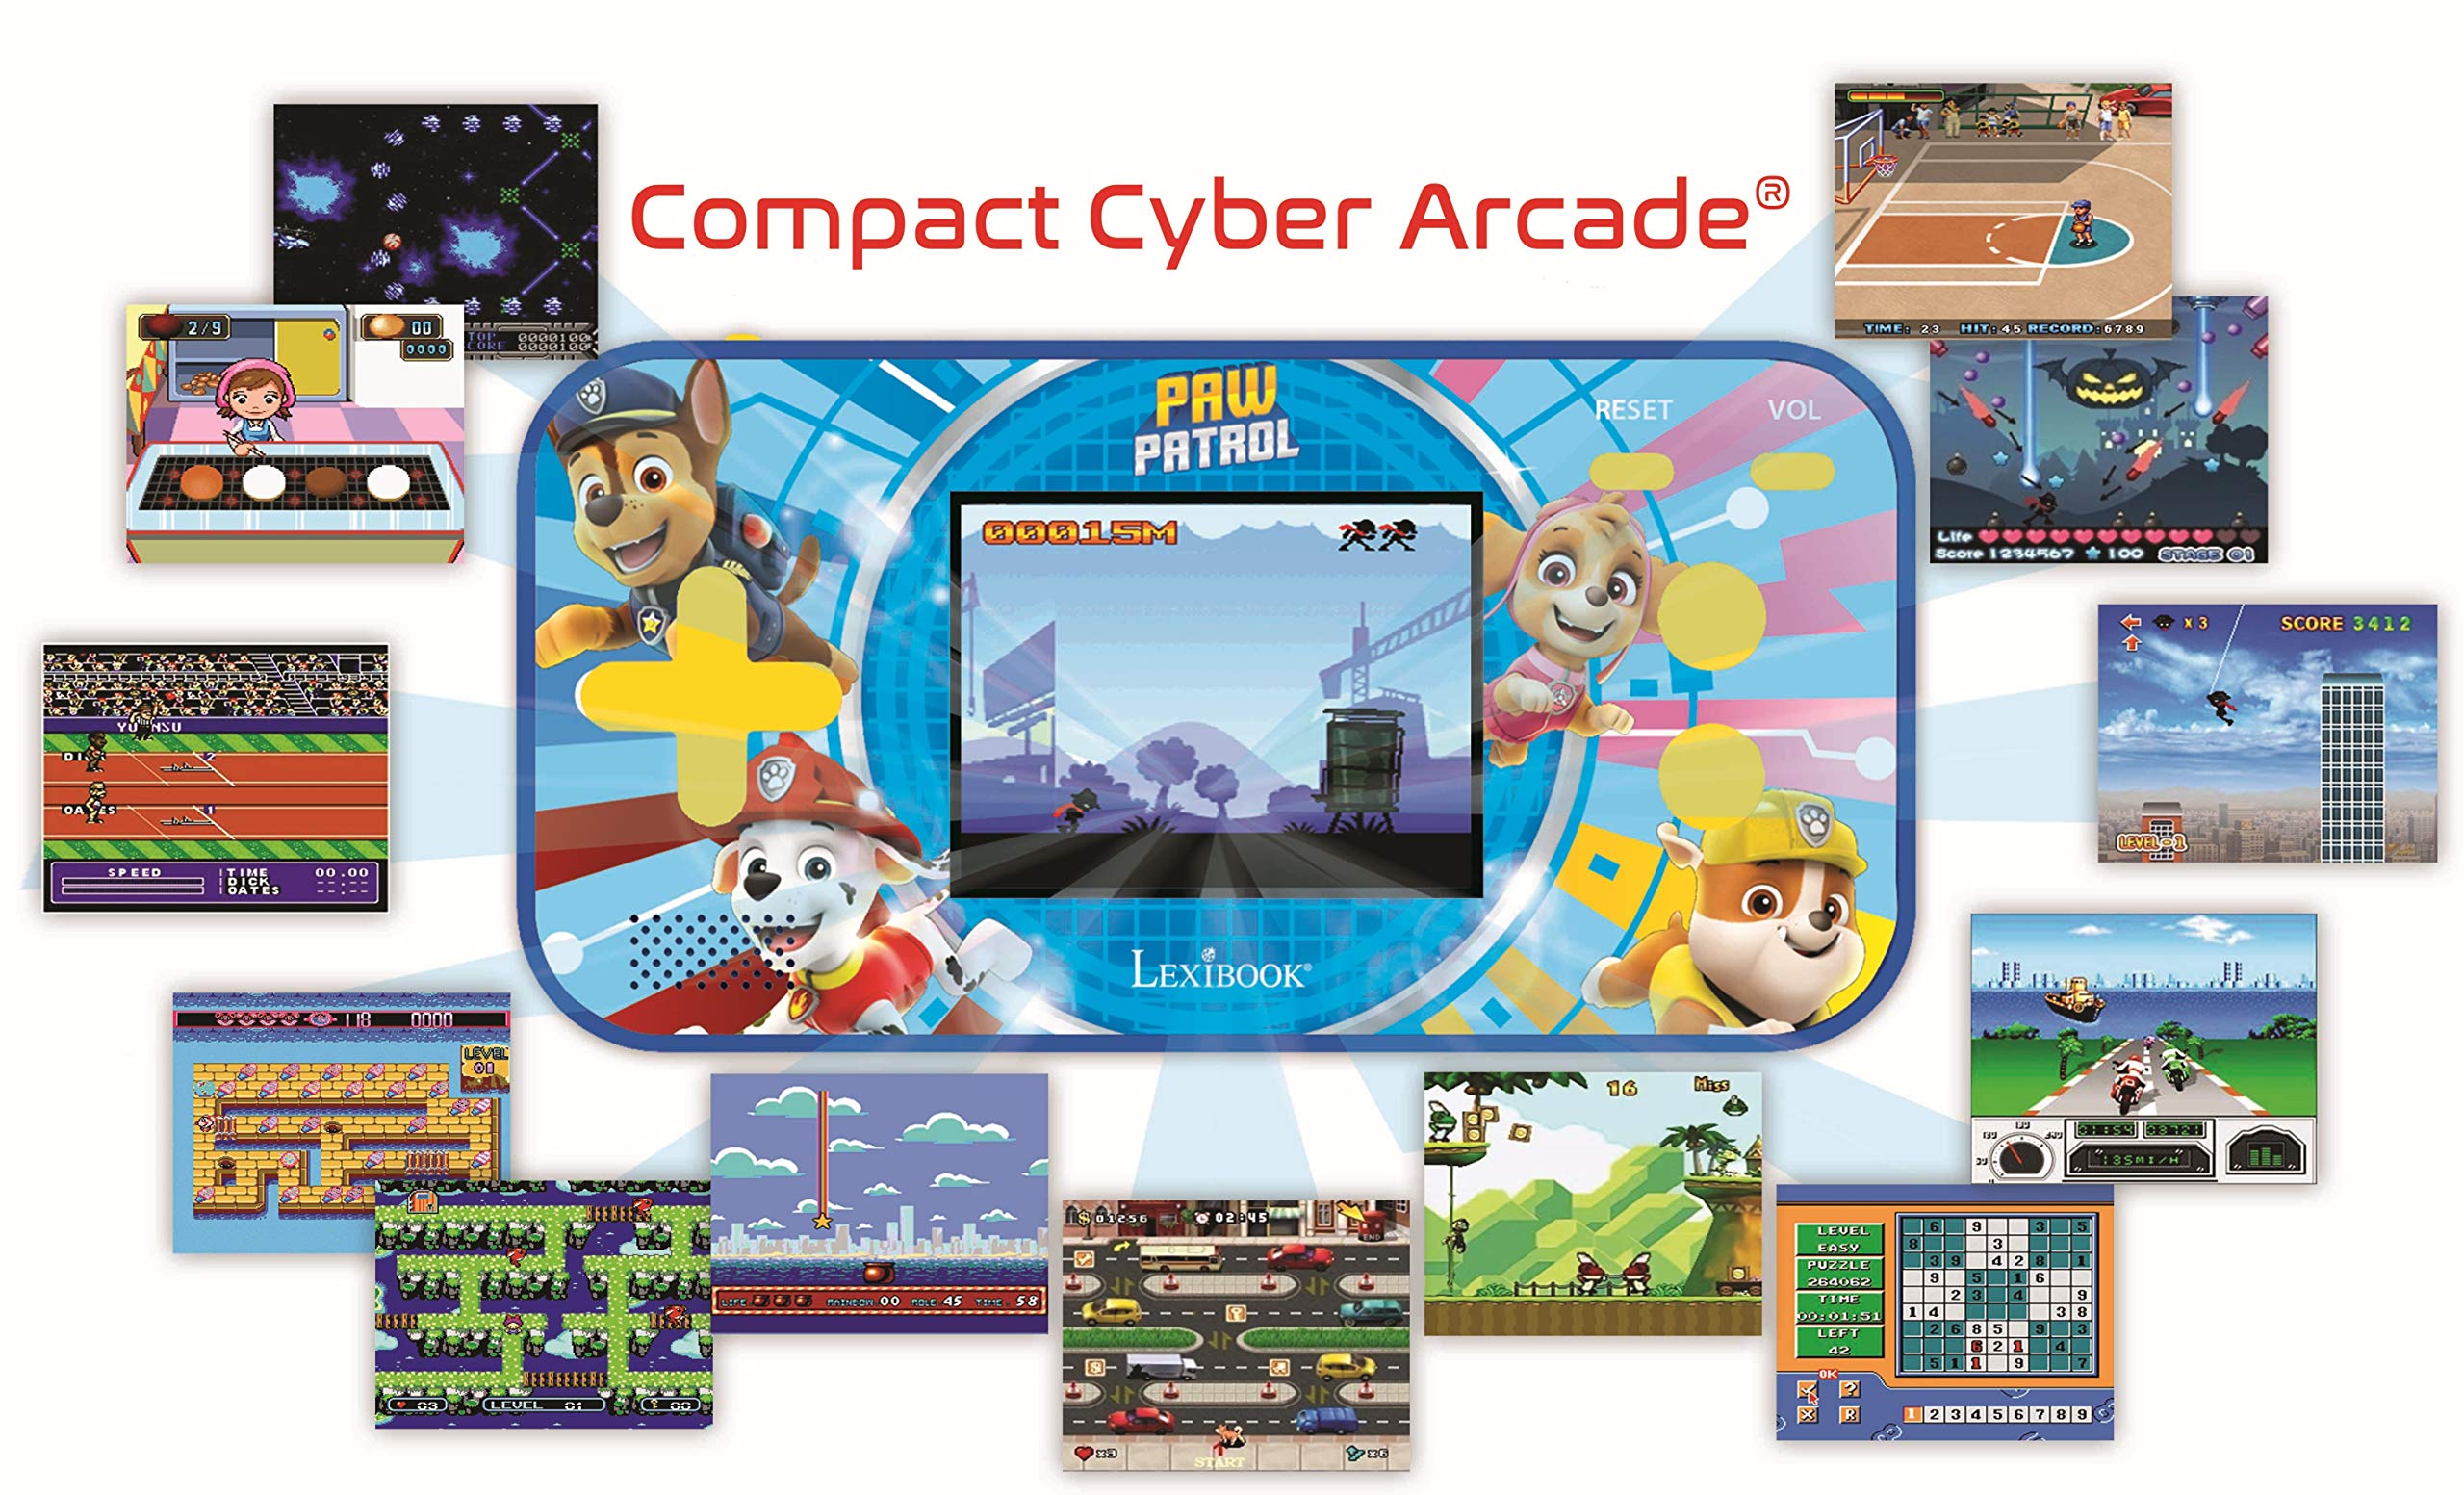 LEXiBOOK JL2367PA Paw Patrol Chase Compact Cyber Arcade Portable Console, 150 Games, LCD, Battery Operated, Red/Blue